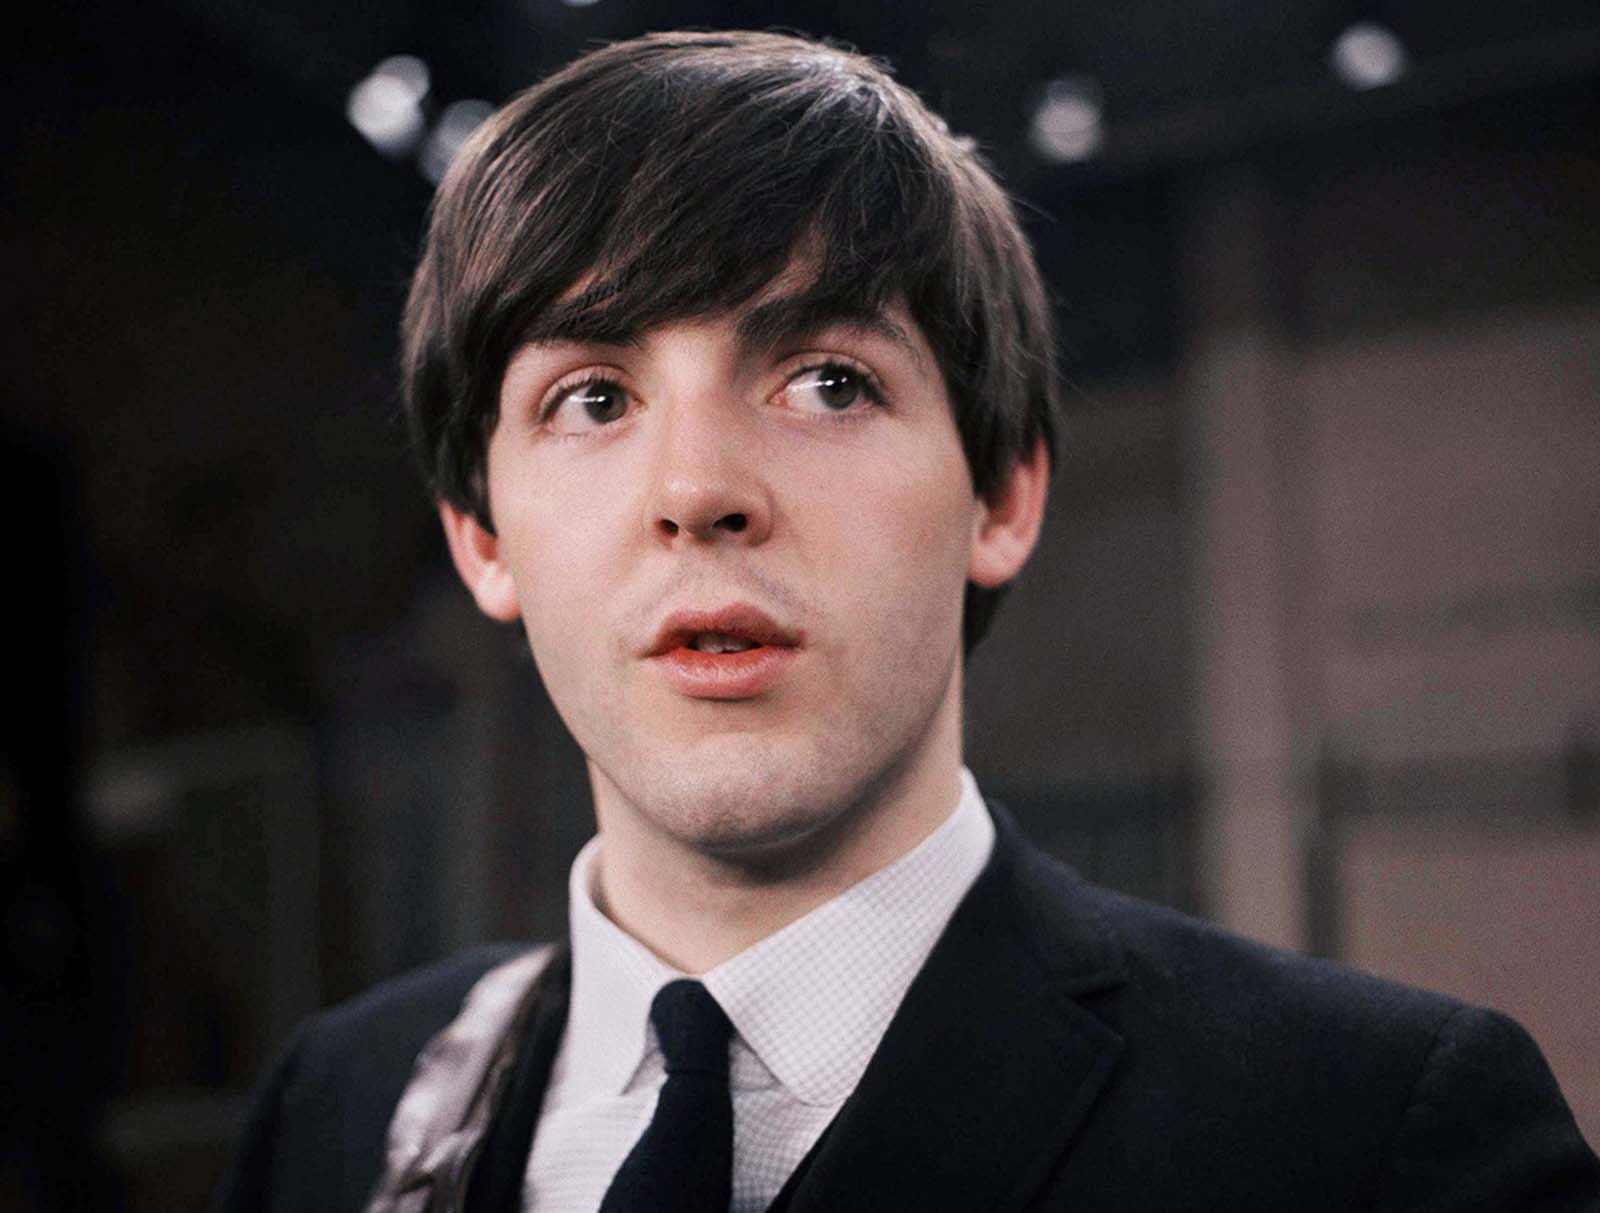 Paul McCartney, 21 years old, on the set of the Ed Sullivan Show with the Beatles, on February 9, 1964.